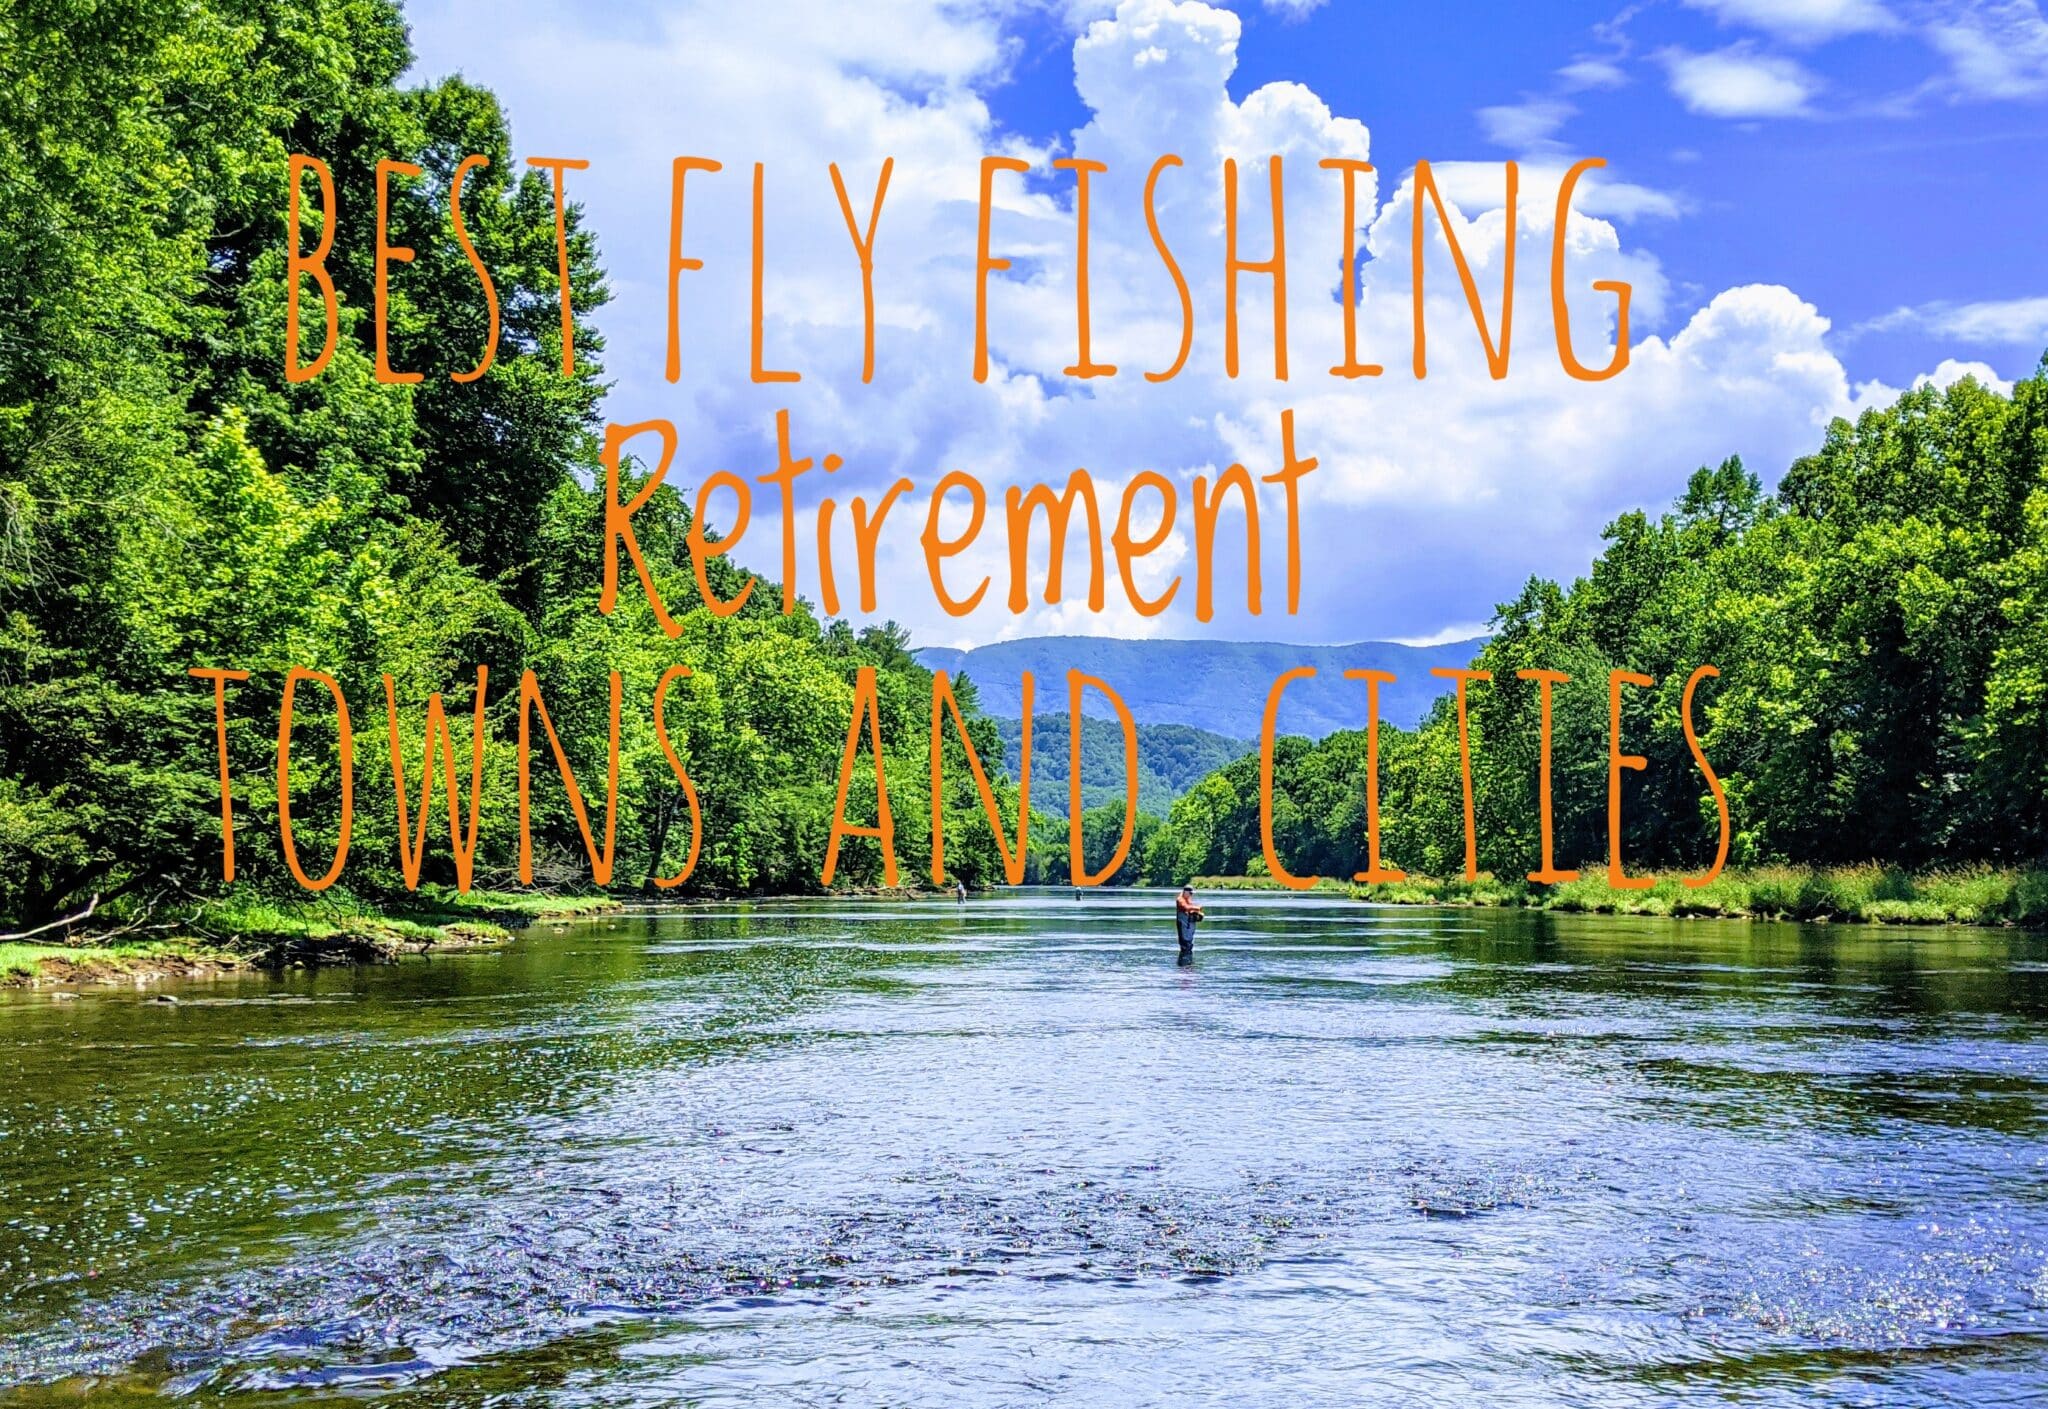 Best Fly Fishing Retirement Towns and Cities